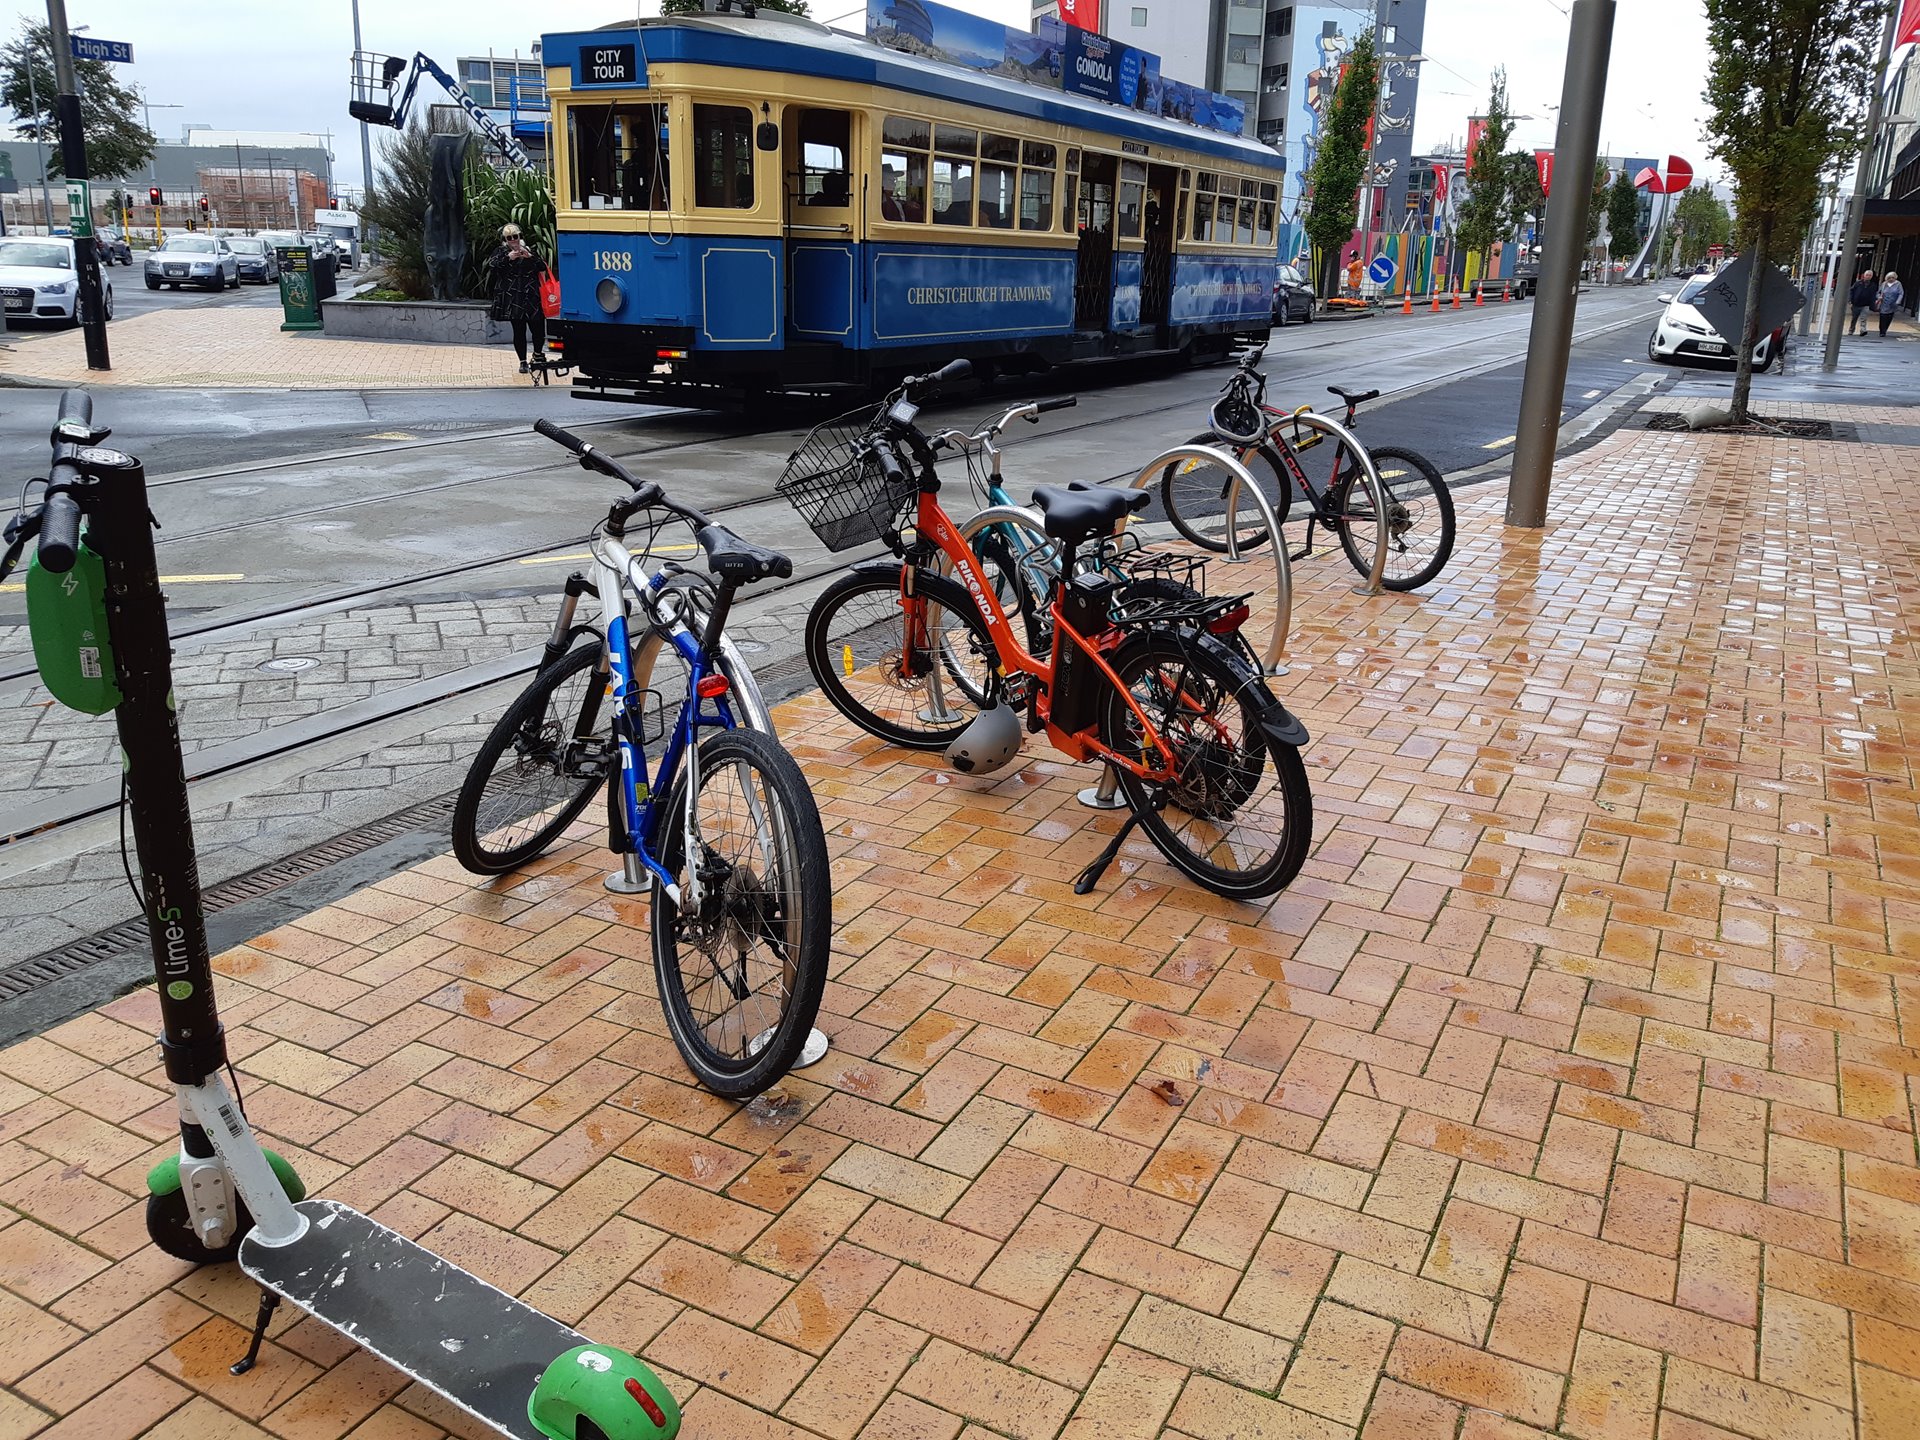 Transport options in Christchurch